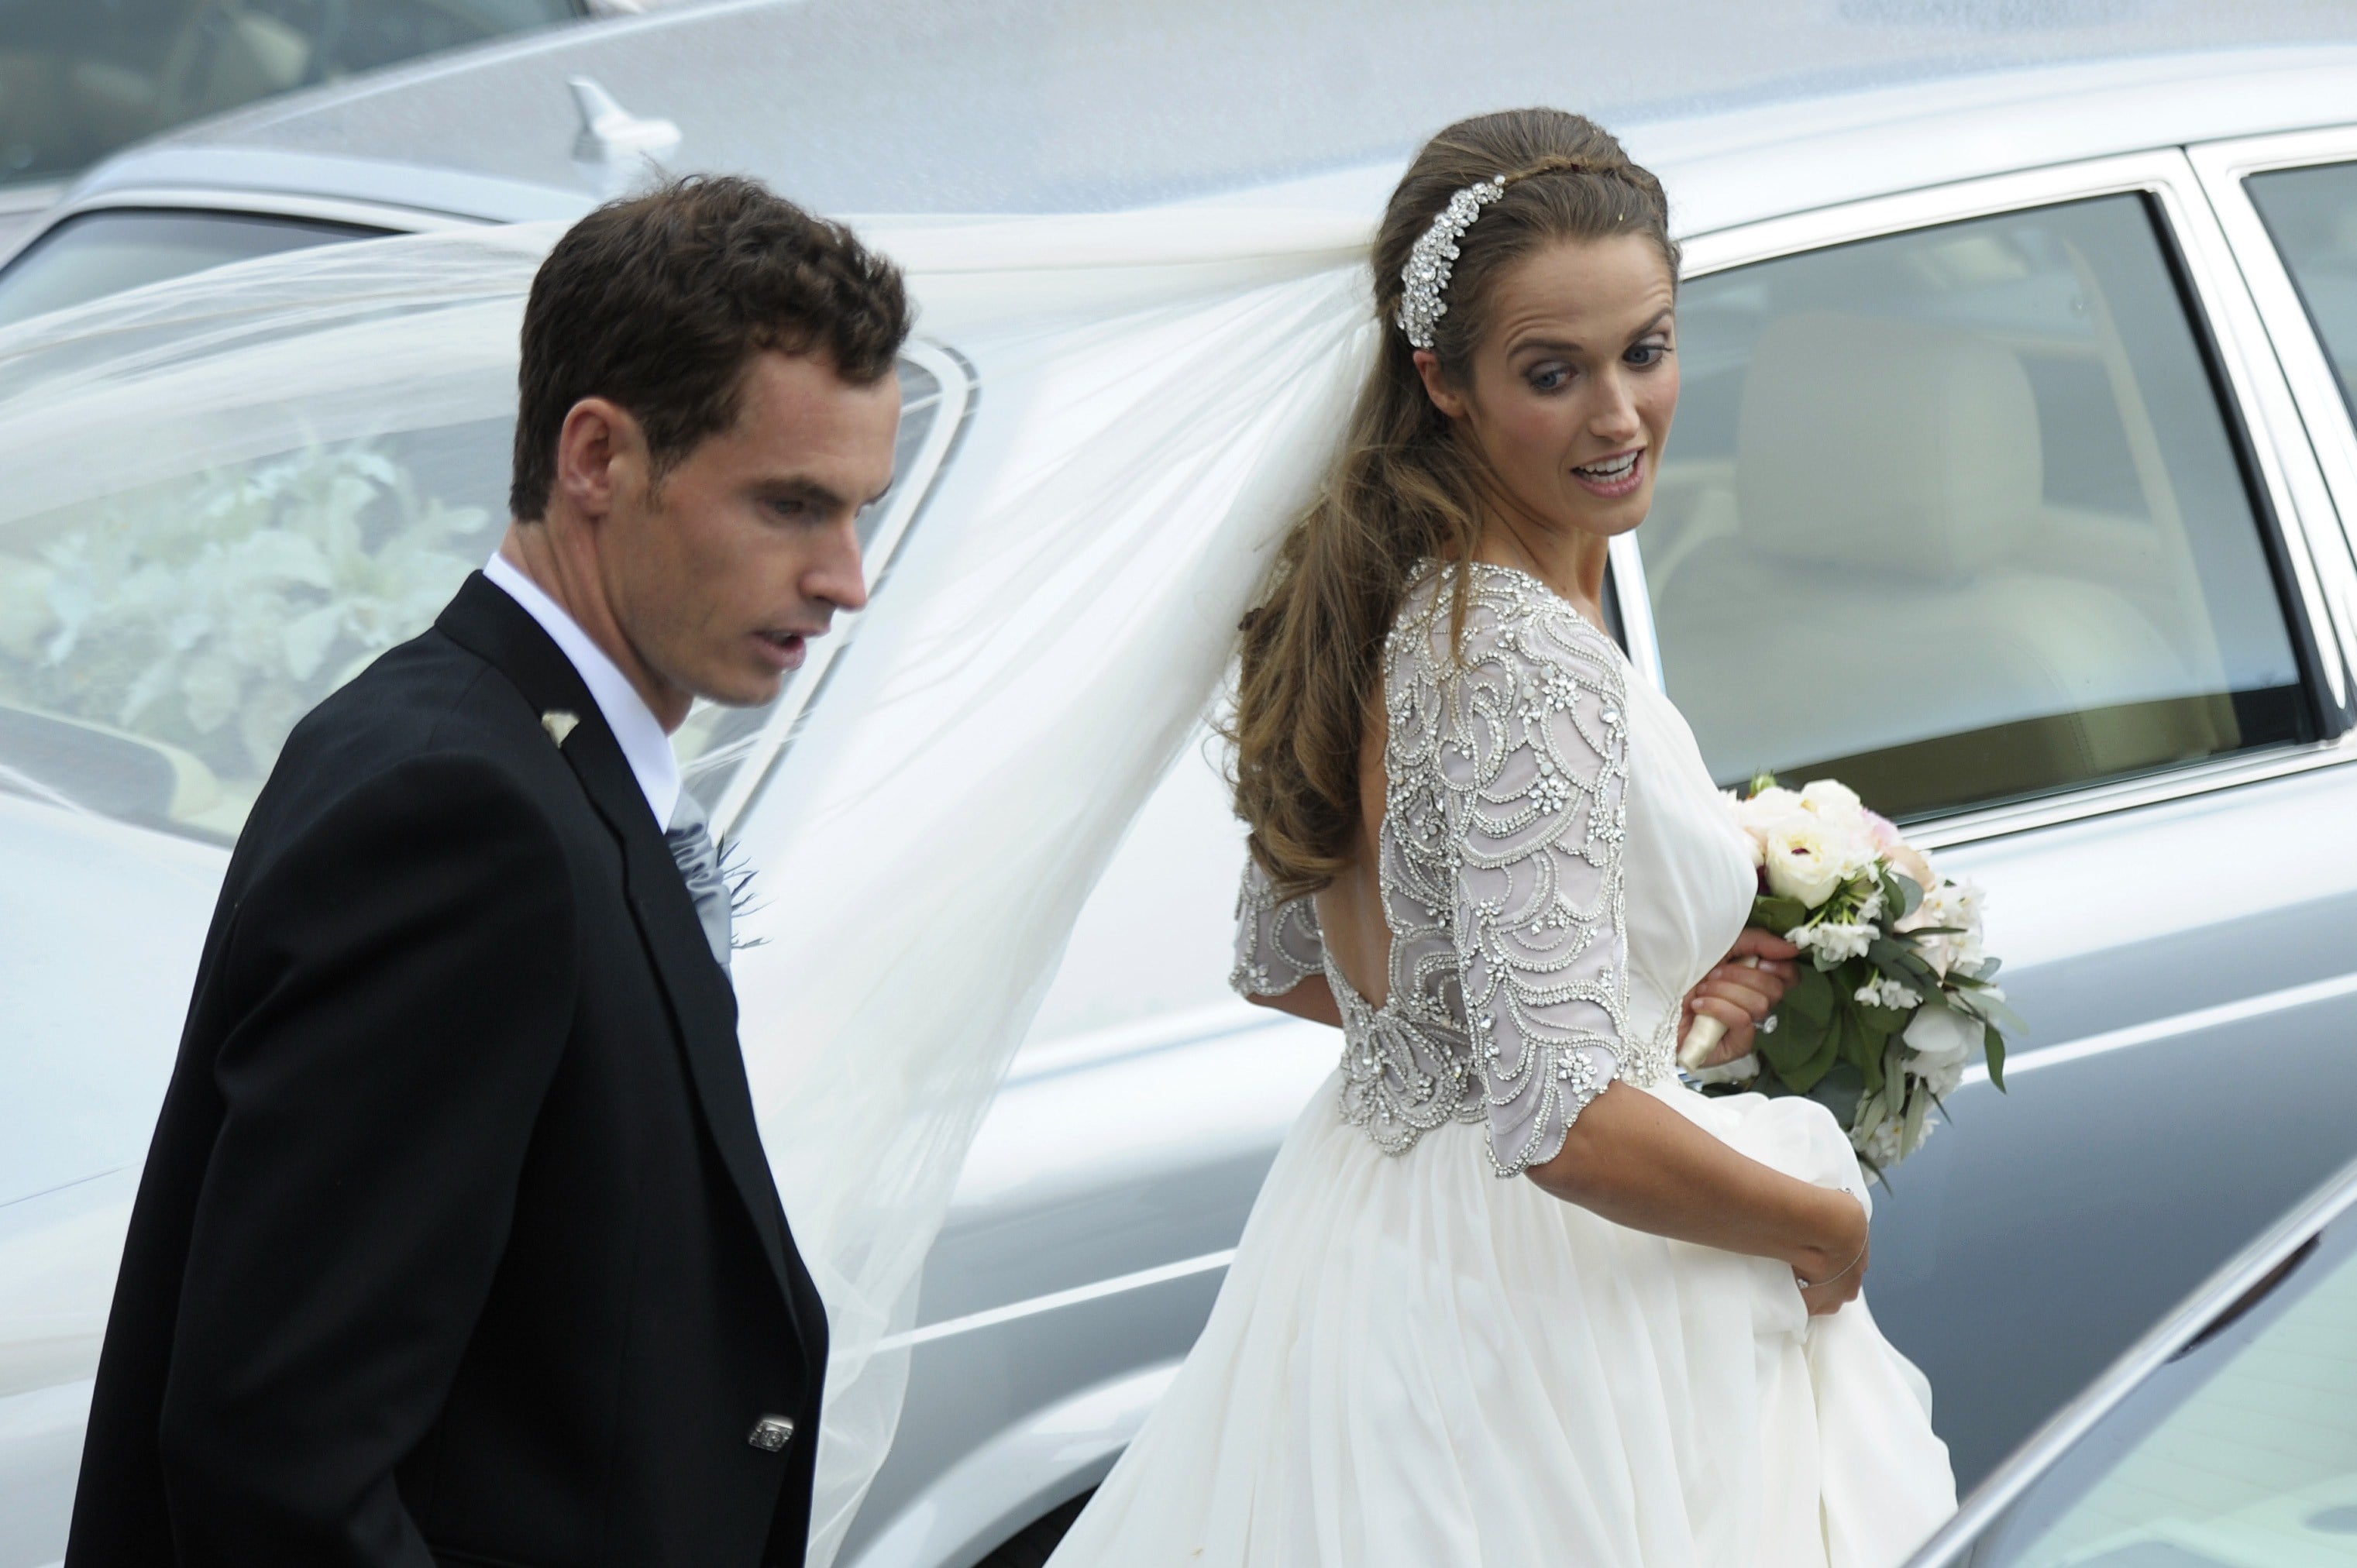 Andy Murray & Kim Sears Are Getting Married This Weekend!: Photo